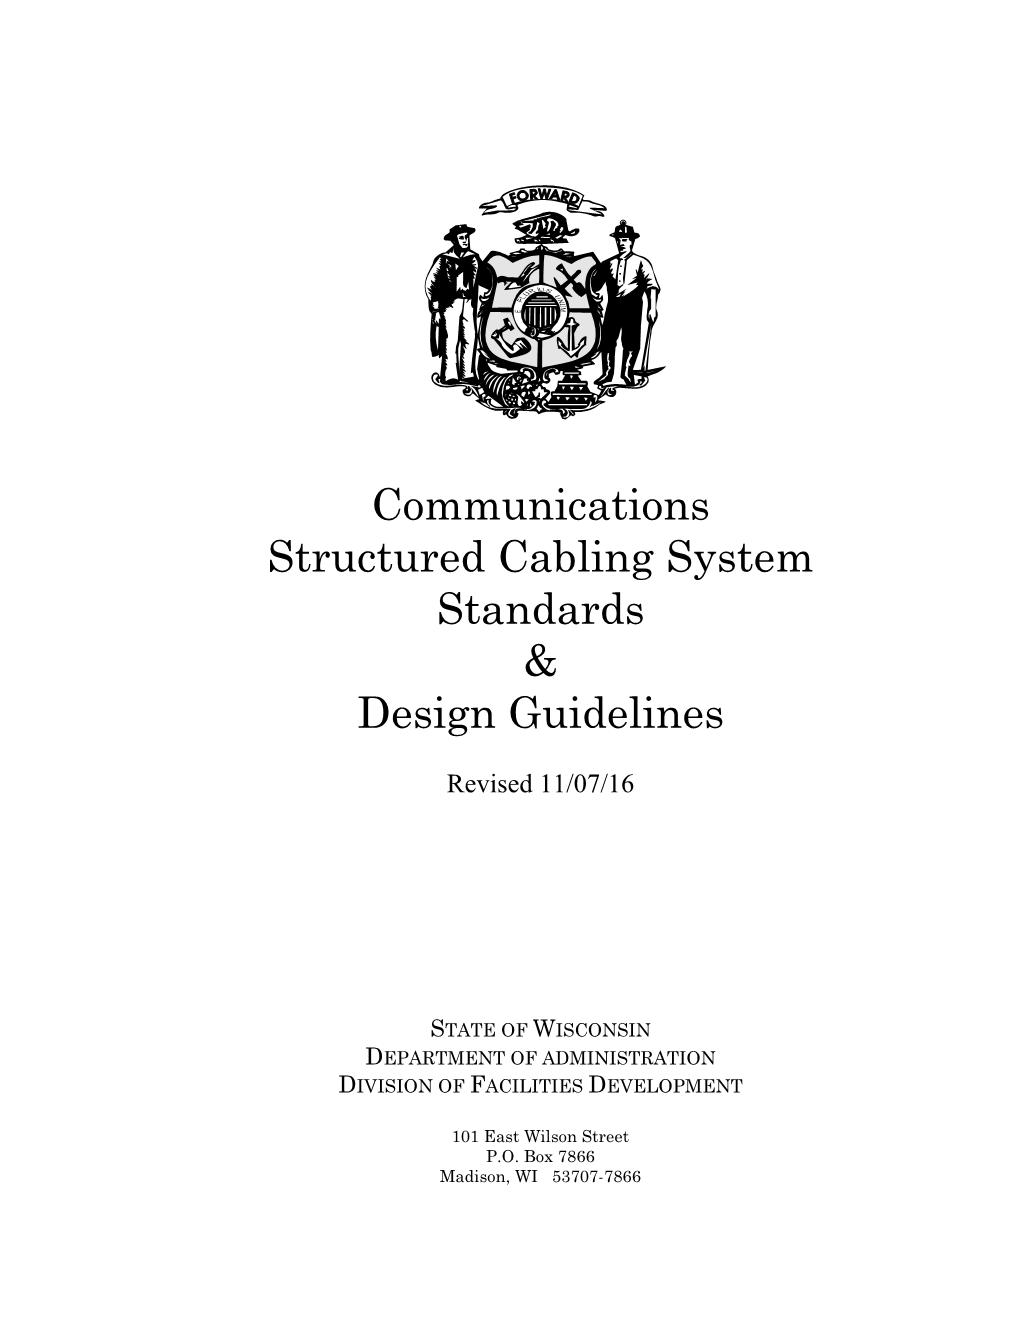 Communications Structured Cabling System Standards & Design Guidelines